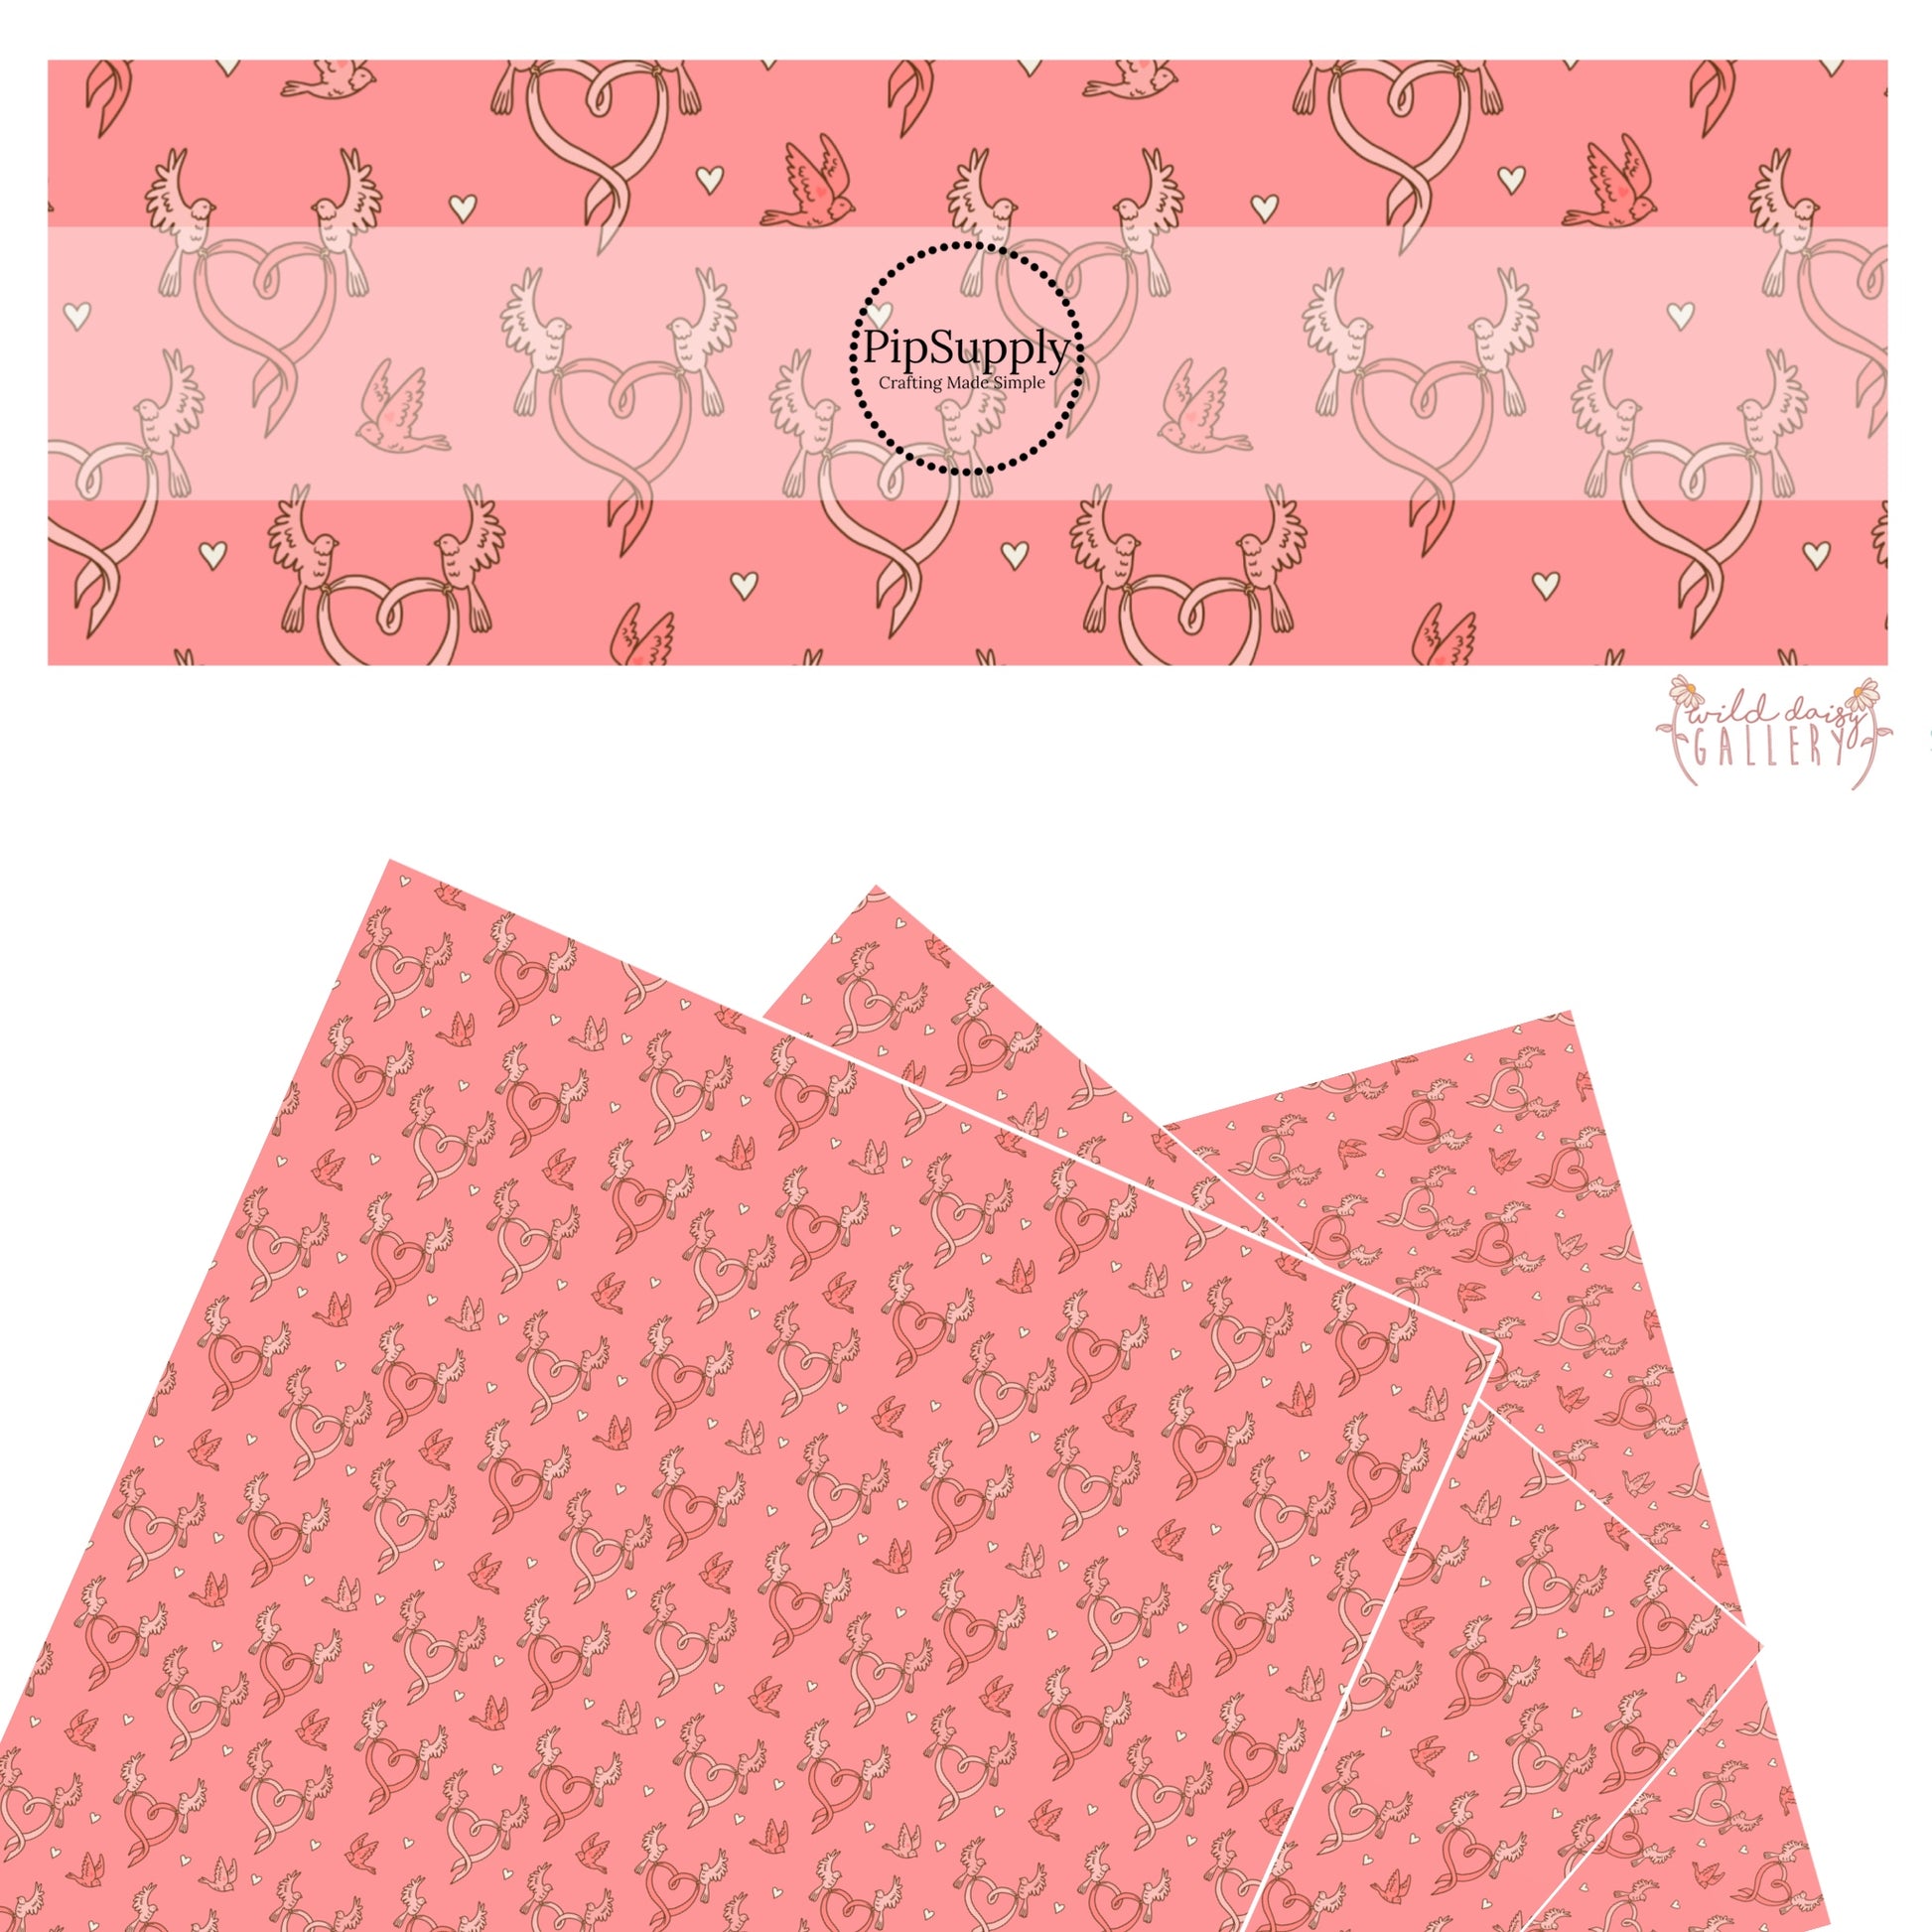 These Valentine's pattern themed faux leather sheets contain the following design elements: pink dove birds with ribbon hearts on peachy pink. Our CPSIA compliant faux leather sheets or rolls can be used for all types of crafting projects.